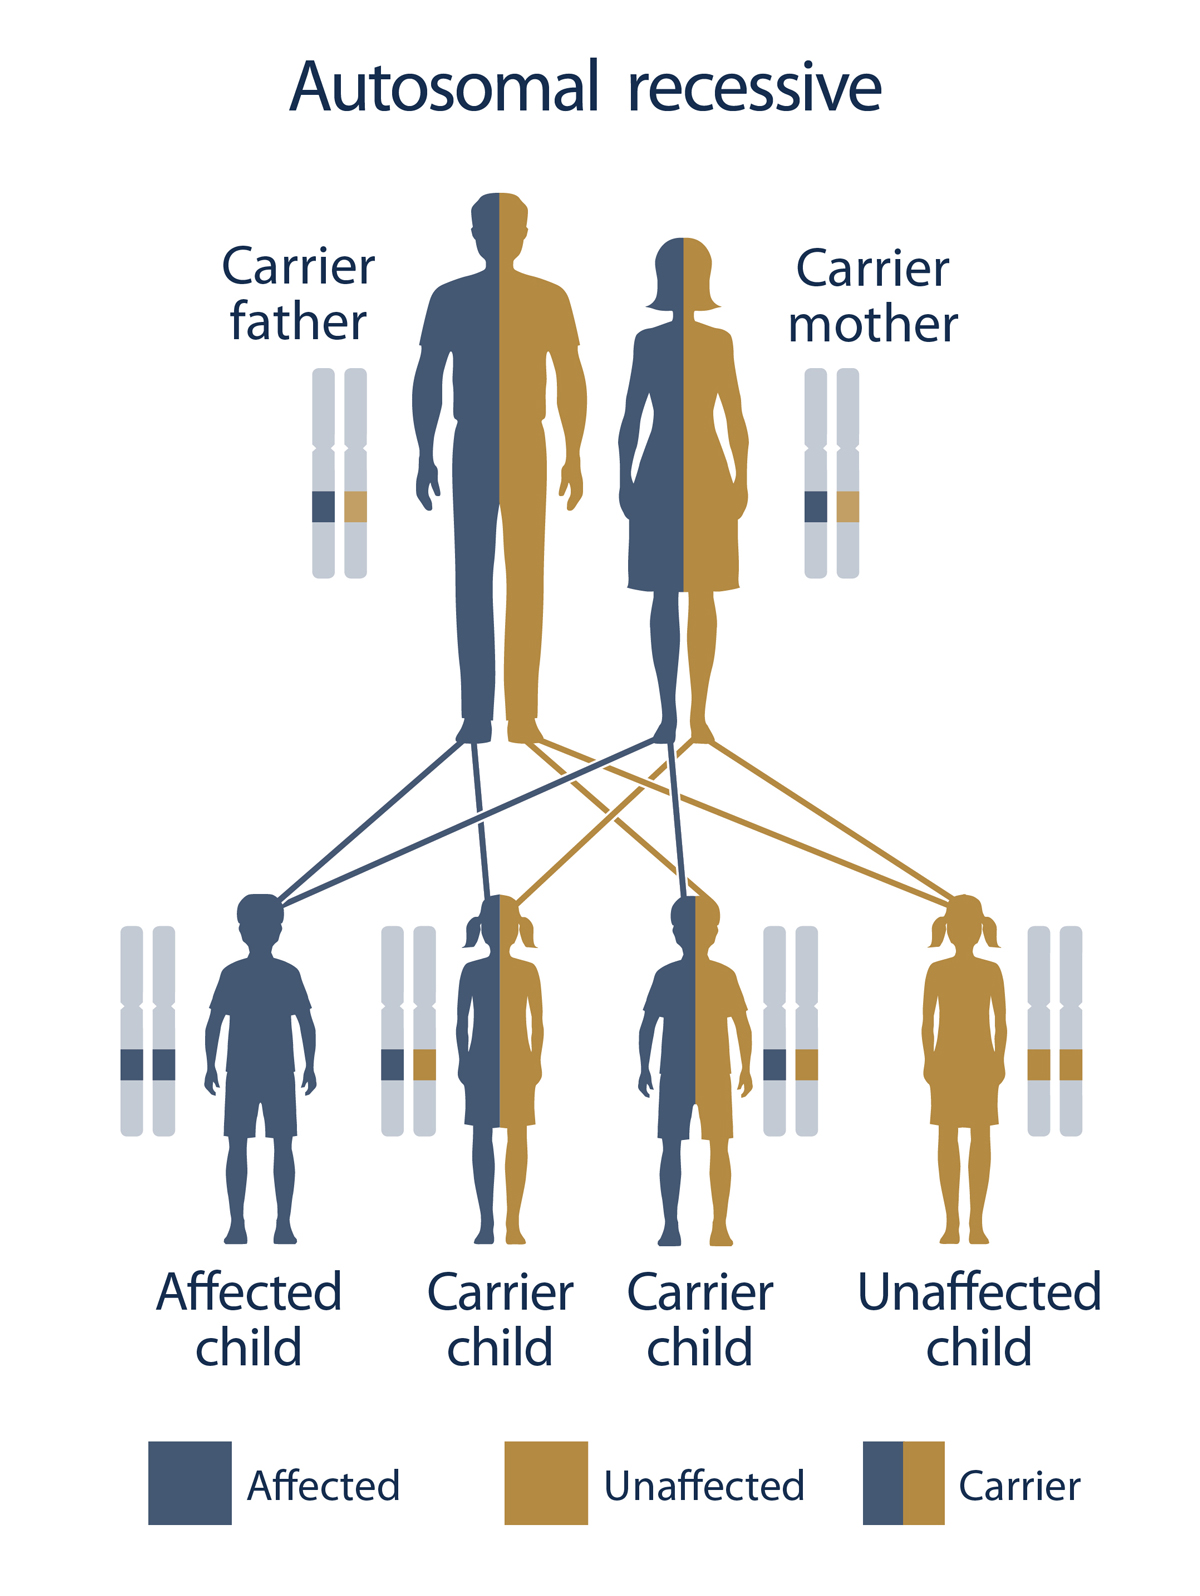 Illustration of Autosomal Recessive Disorder shows two carrier parents and four children: one affected child, two carrier children, and one unaffected child. The affected child has a copy of the congenital adrenal hyperplasis (CAH) gene from both parents.  The carrier children can either have a copy of the CAH gene from the father and a copy of a normal gene from the mother, or a copy of the CAH gene from the mother and a copy of a normal gene from the father. The unaffected child would have a normal gene from both father and mother.